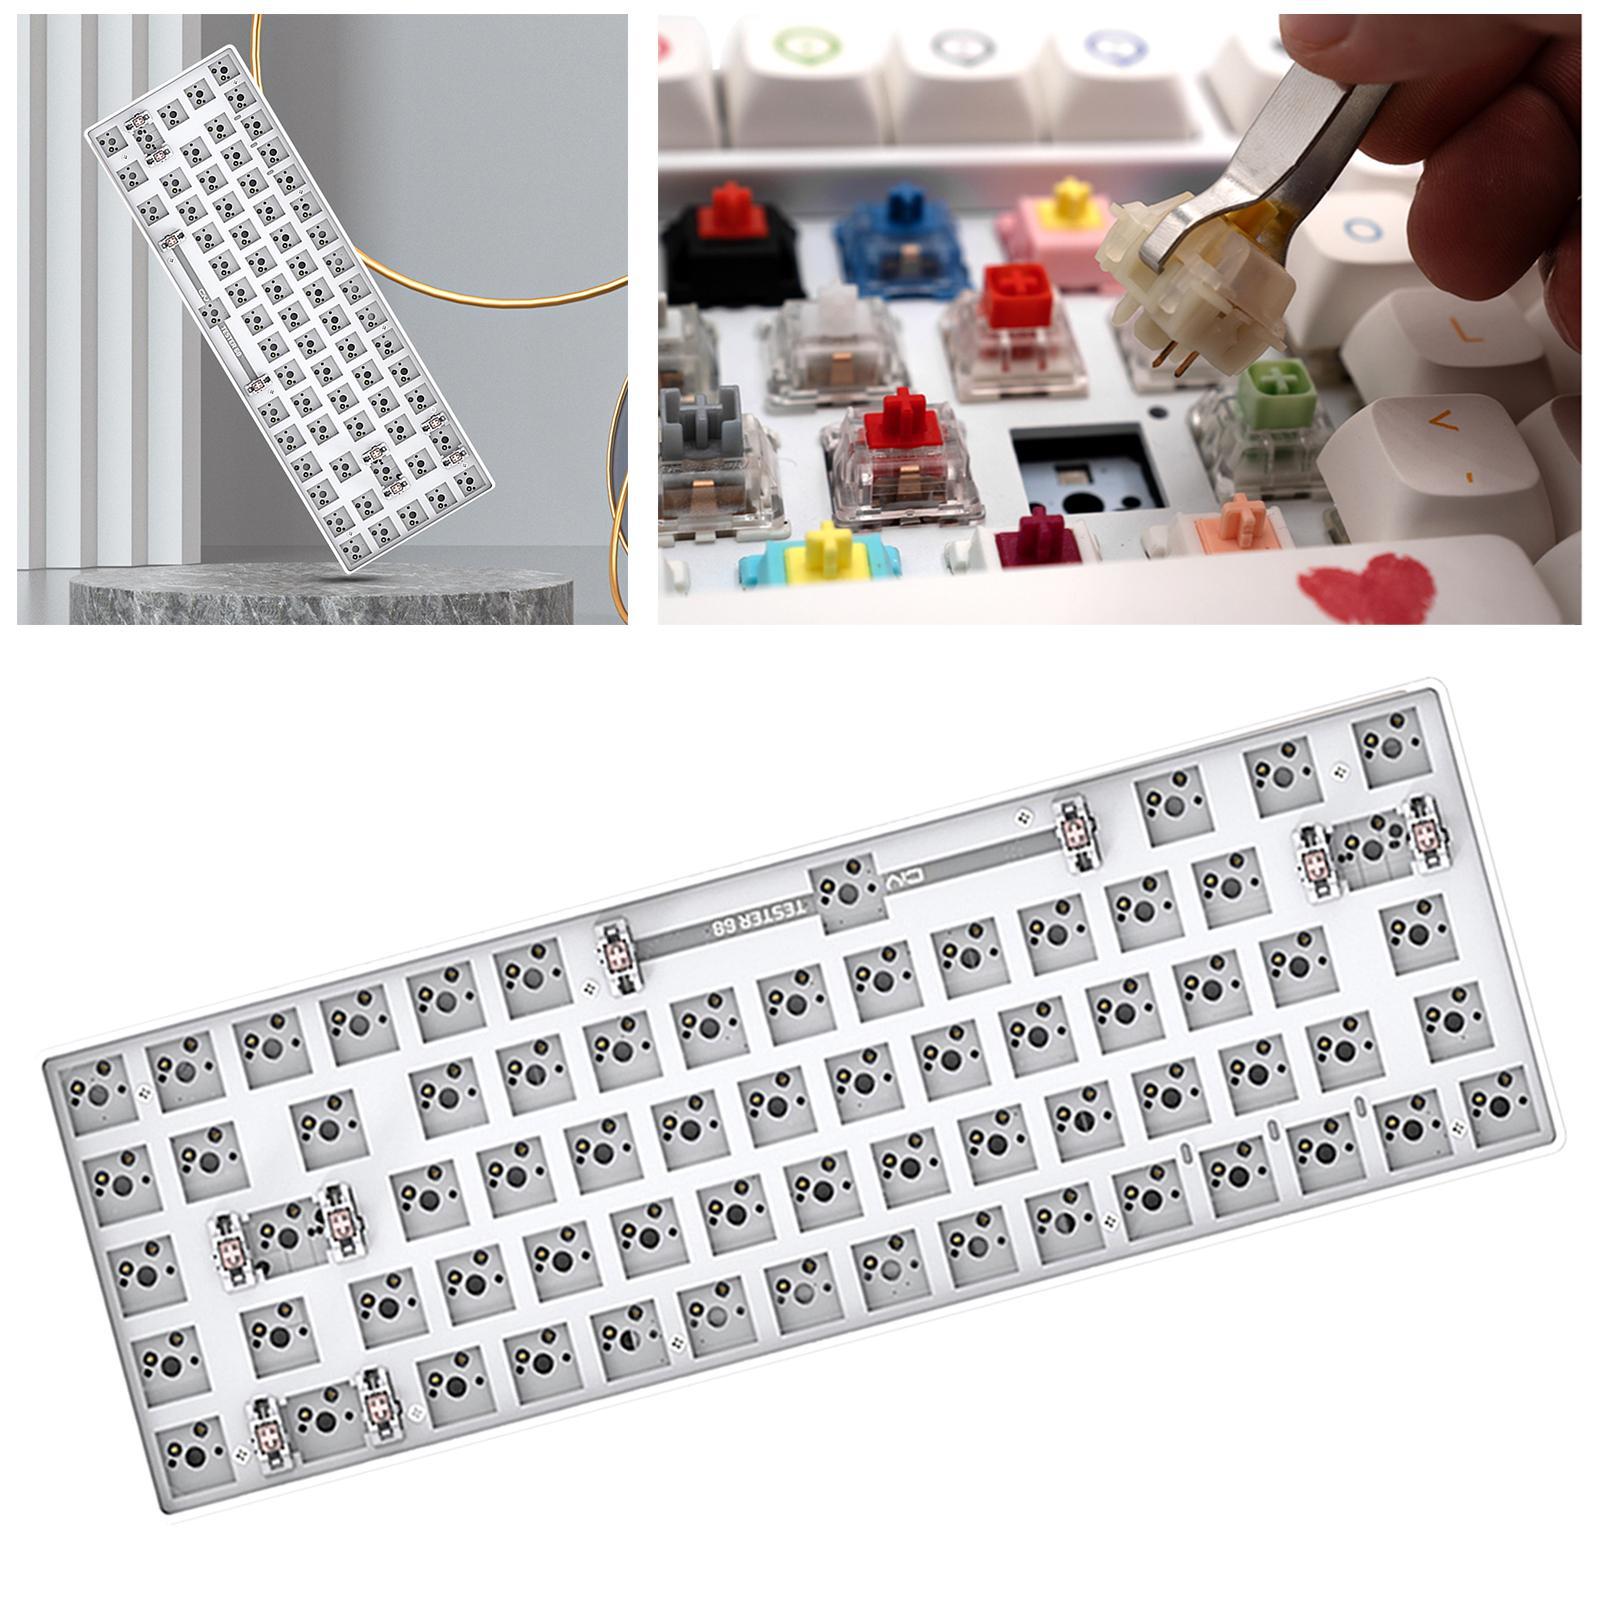 Mechanical Keyboard DIY Kit Hot-Swappable Shaft Base Axis for Windows PC